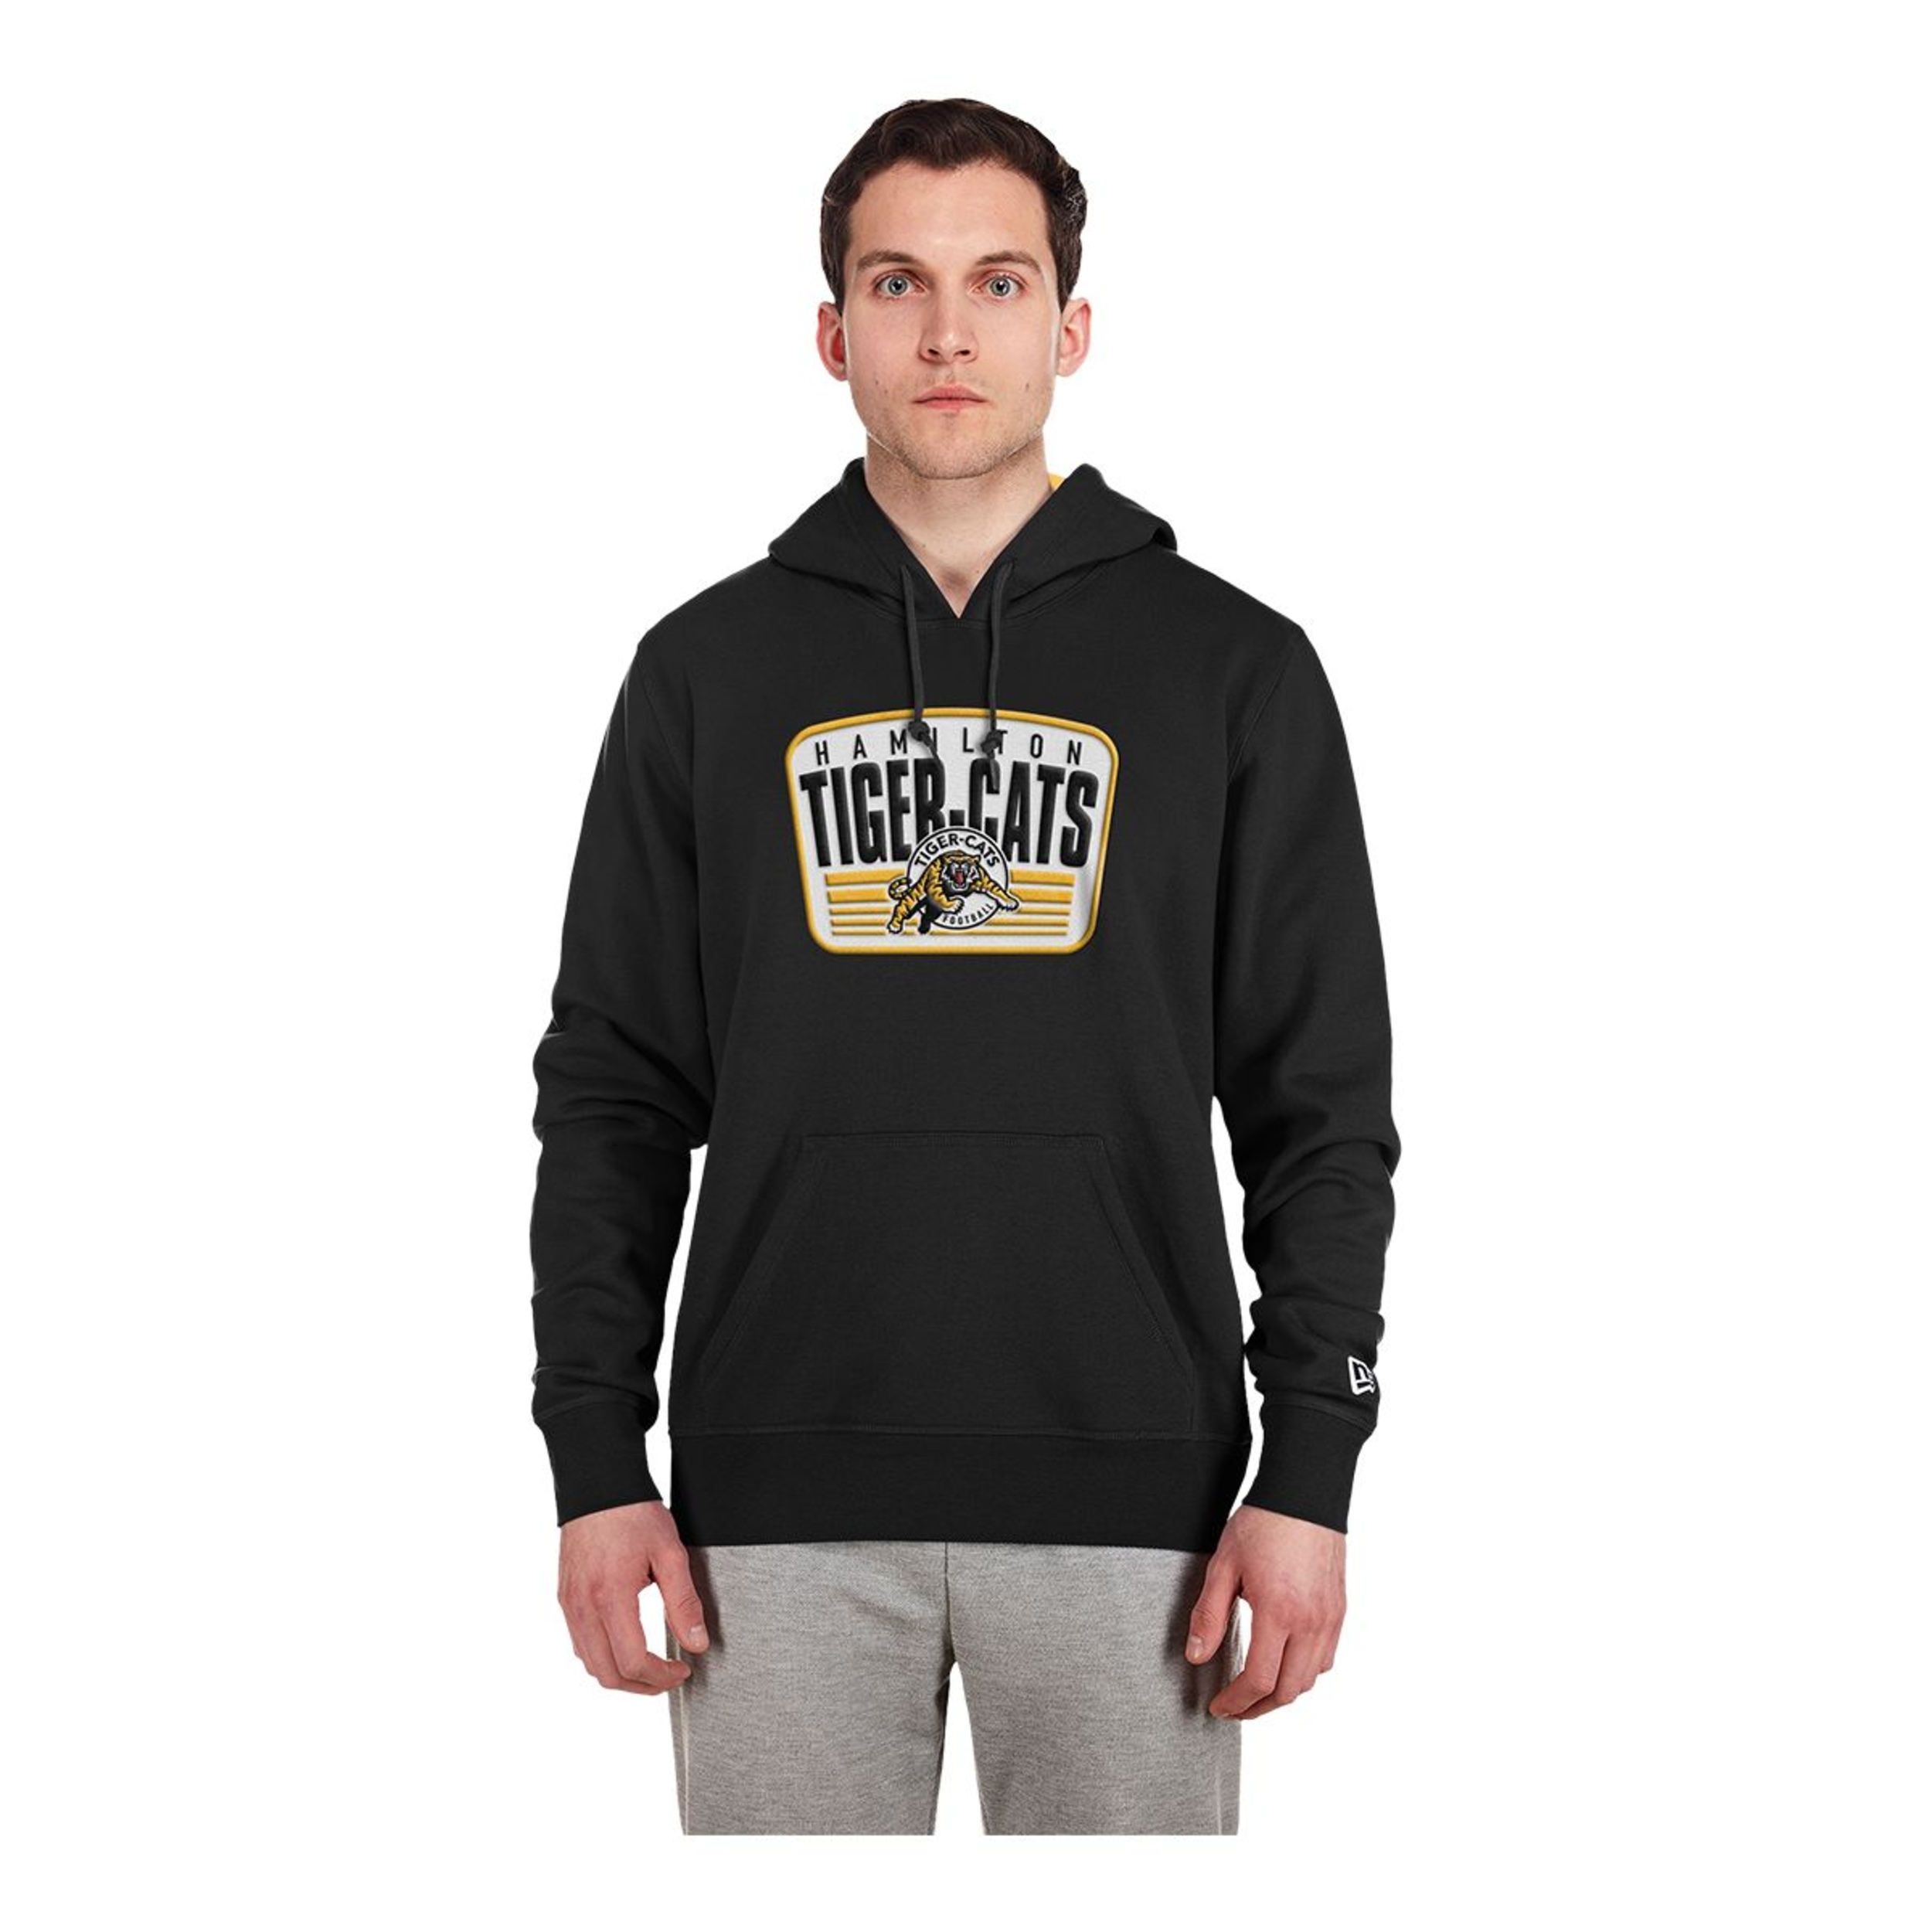 Hamilton Tiger Cats New Era Game Day Patch Hoodie | SportChek